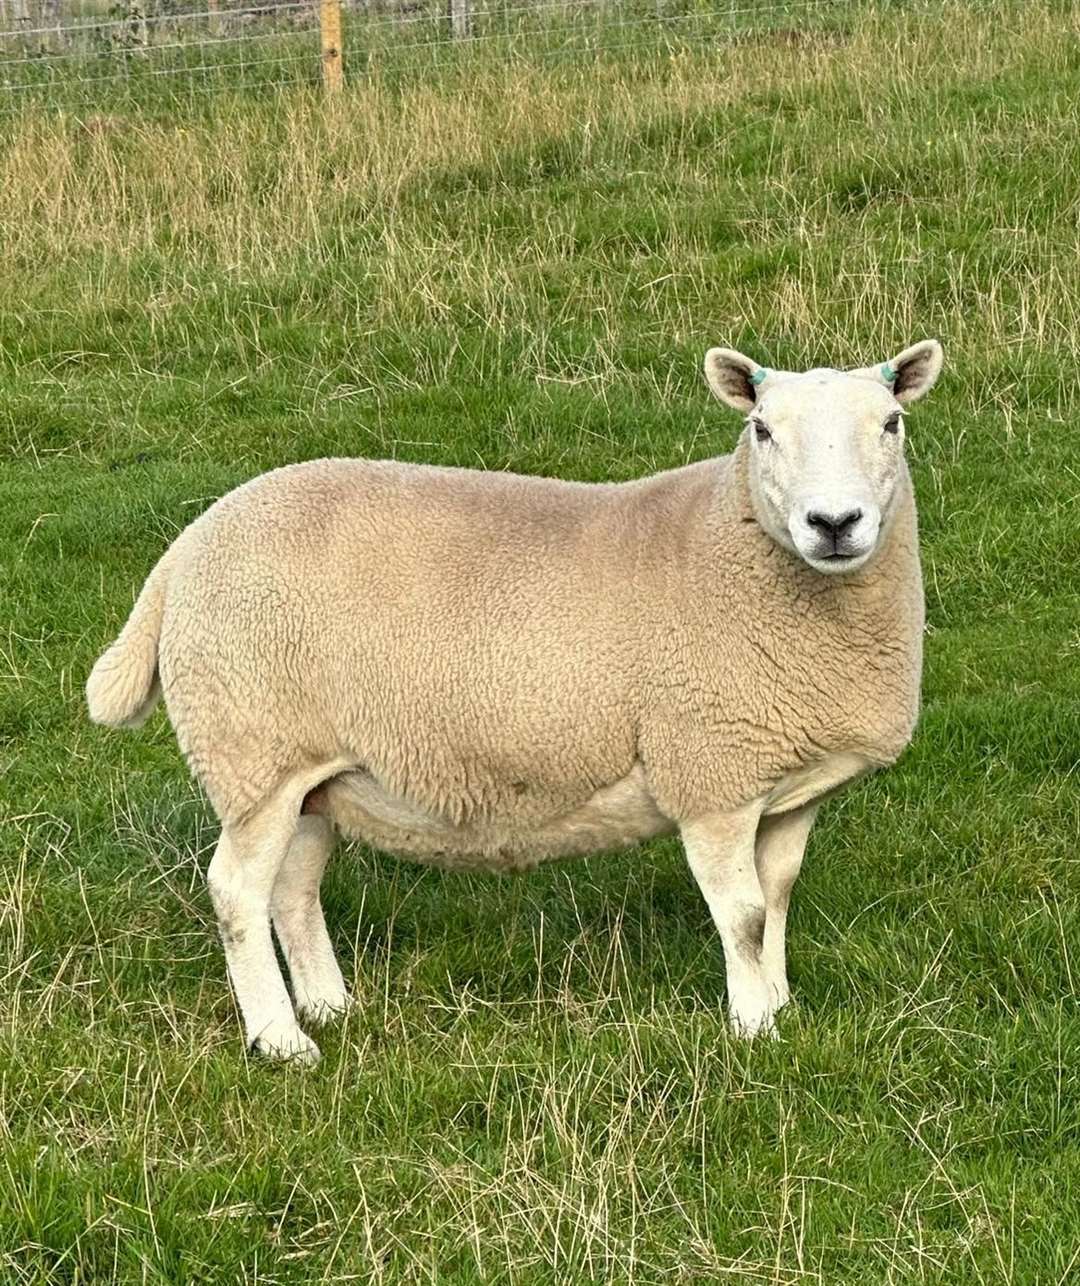 Lairg Crofters Show overall sheep champion.